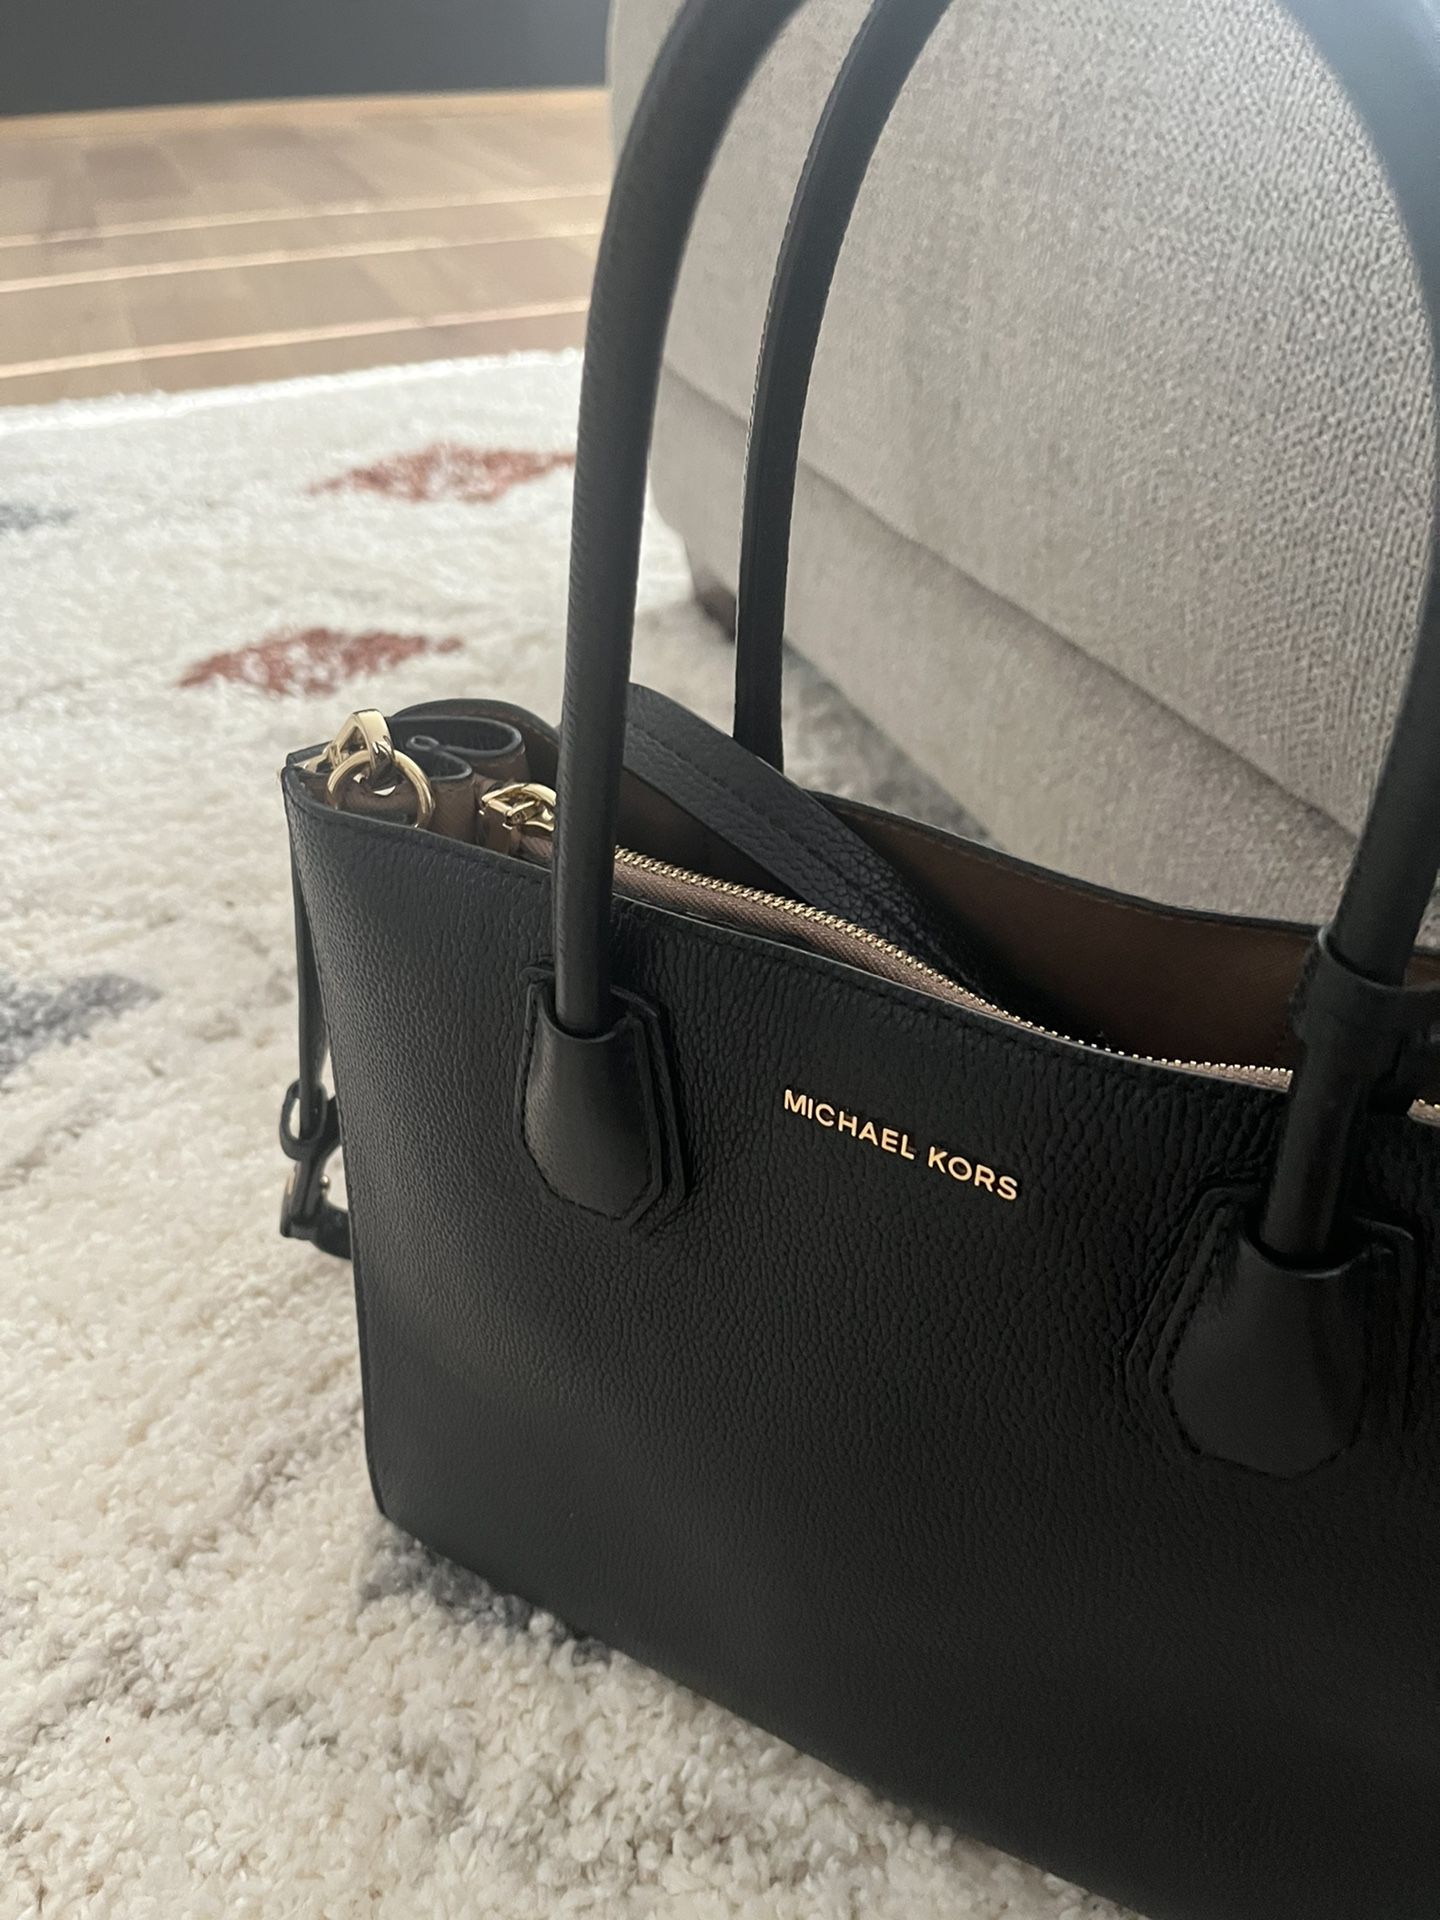 Michael Kors Studio Mercer Convertible Tote New w/ tag for Sale in Norfolk,  VA - OfferUp